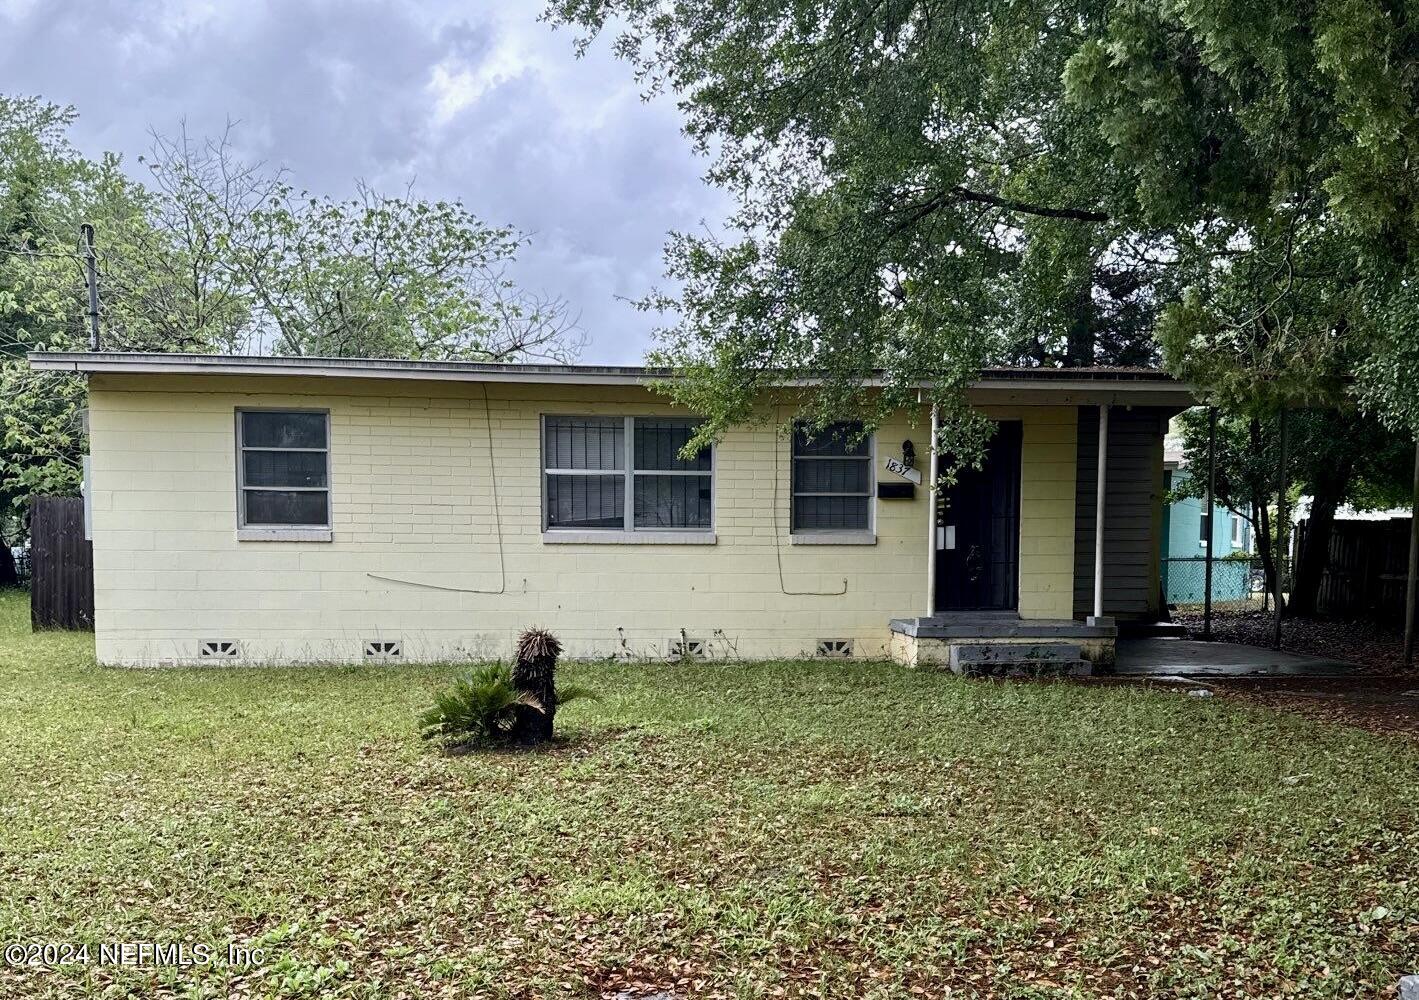 Jacksonville, FL home for sale located at 1837 W 31st Street, Jacksonville, FL 32209